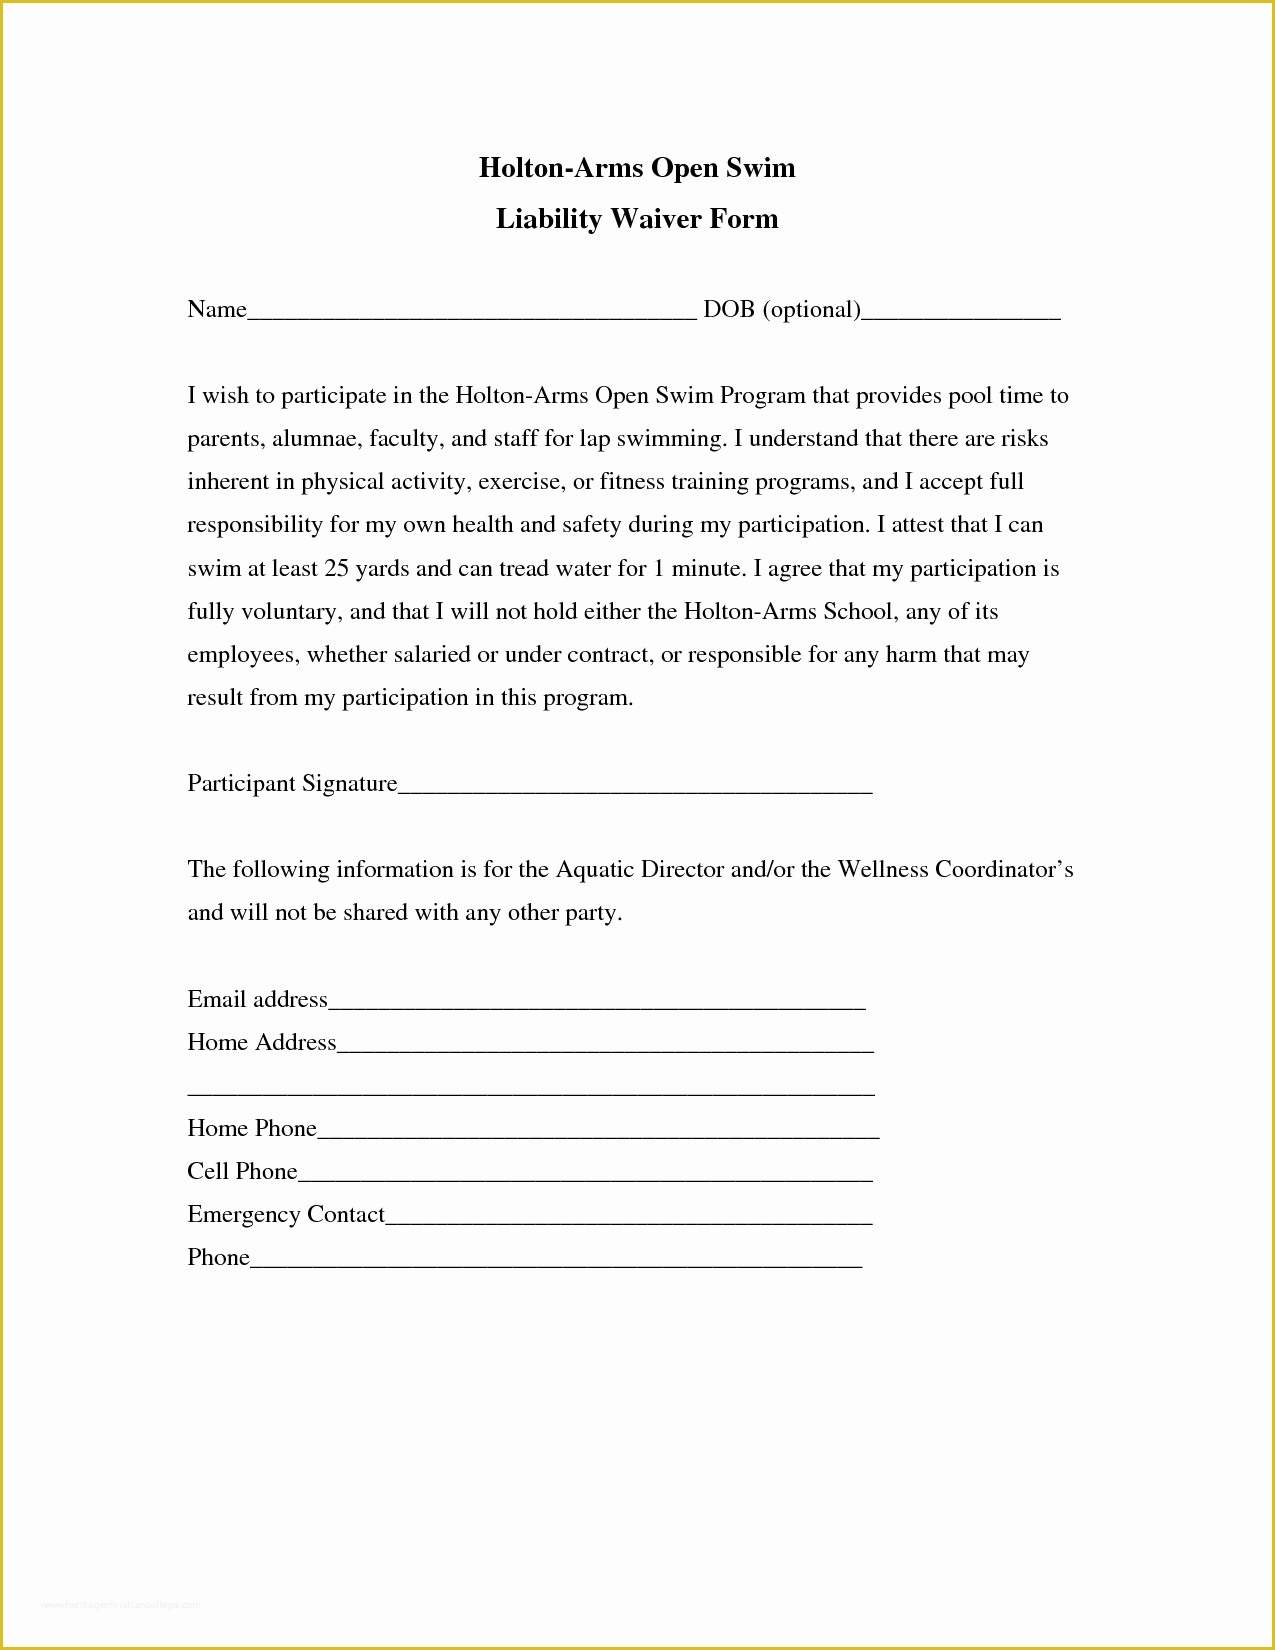 Free General Liability Release form Template Of Liability Insurance Liability Insurance Waiver Template